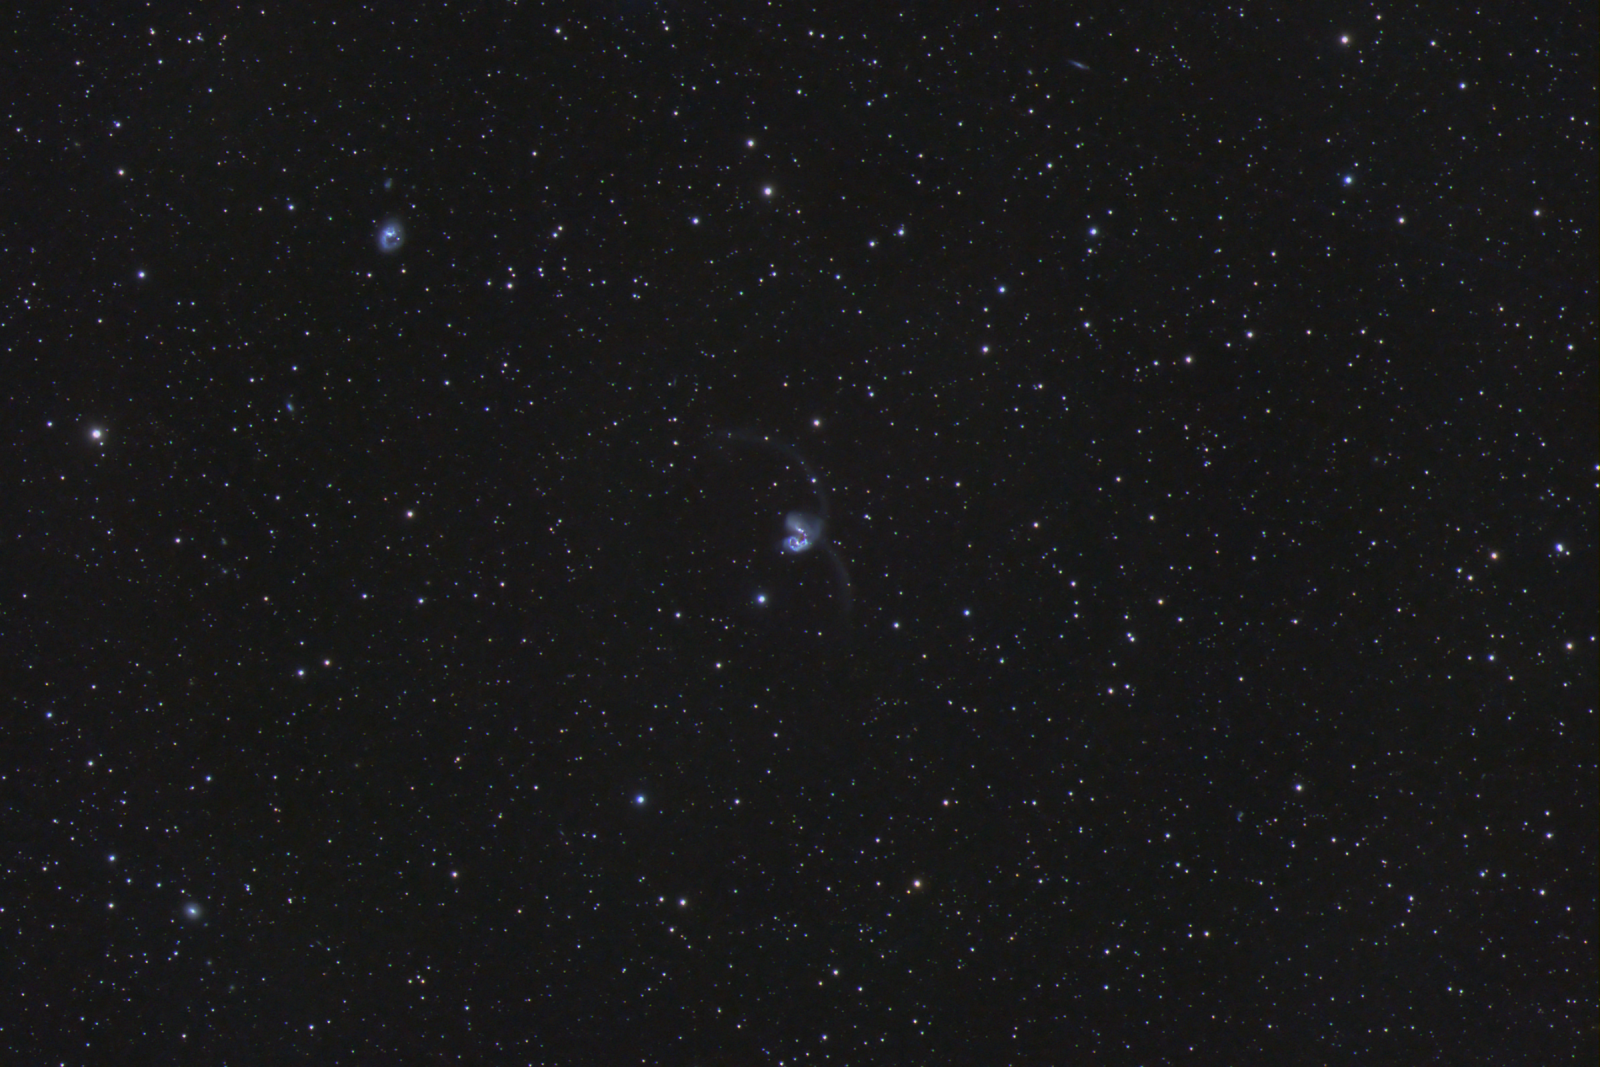 ngc4038_stacked20x300s_F.thumb.png.6b3afd1546e6528b06c05a68c14fd79a.png